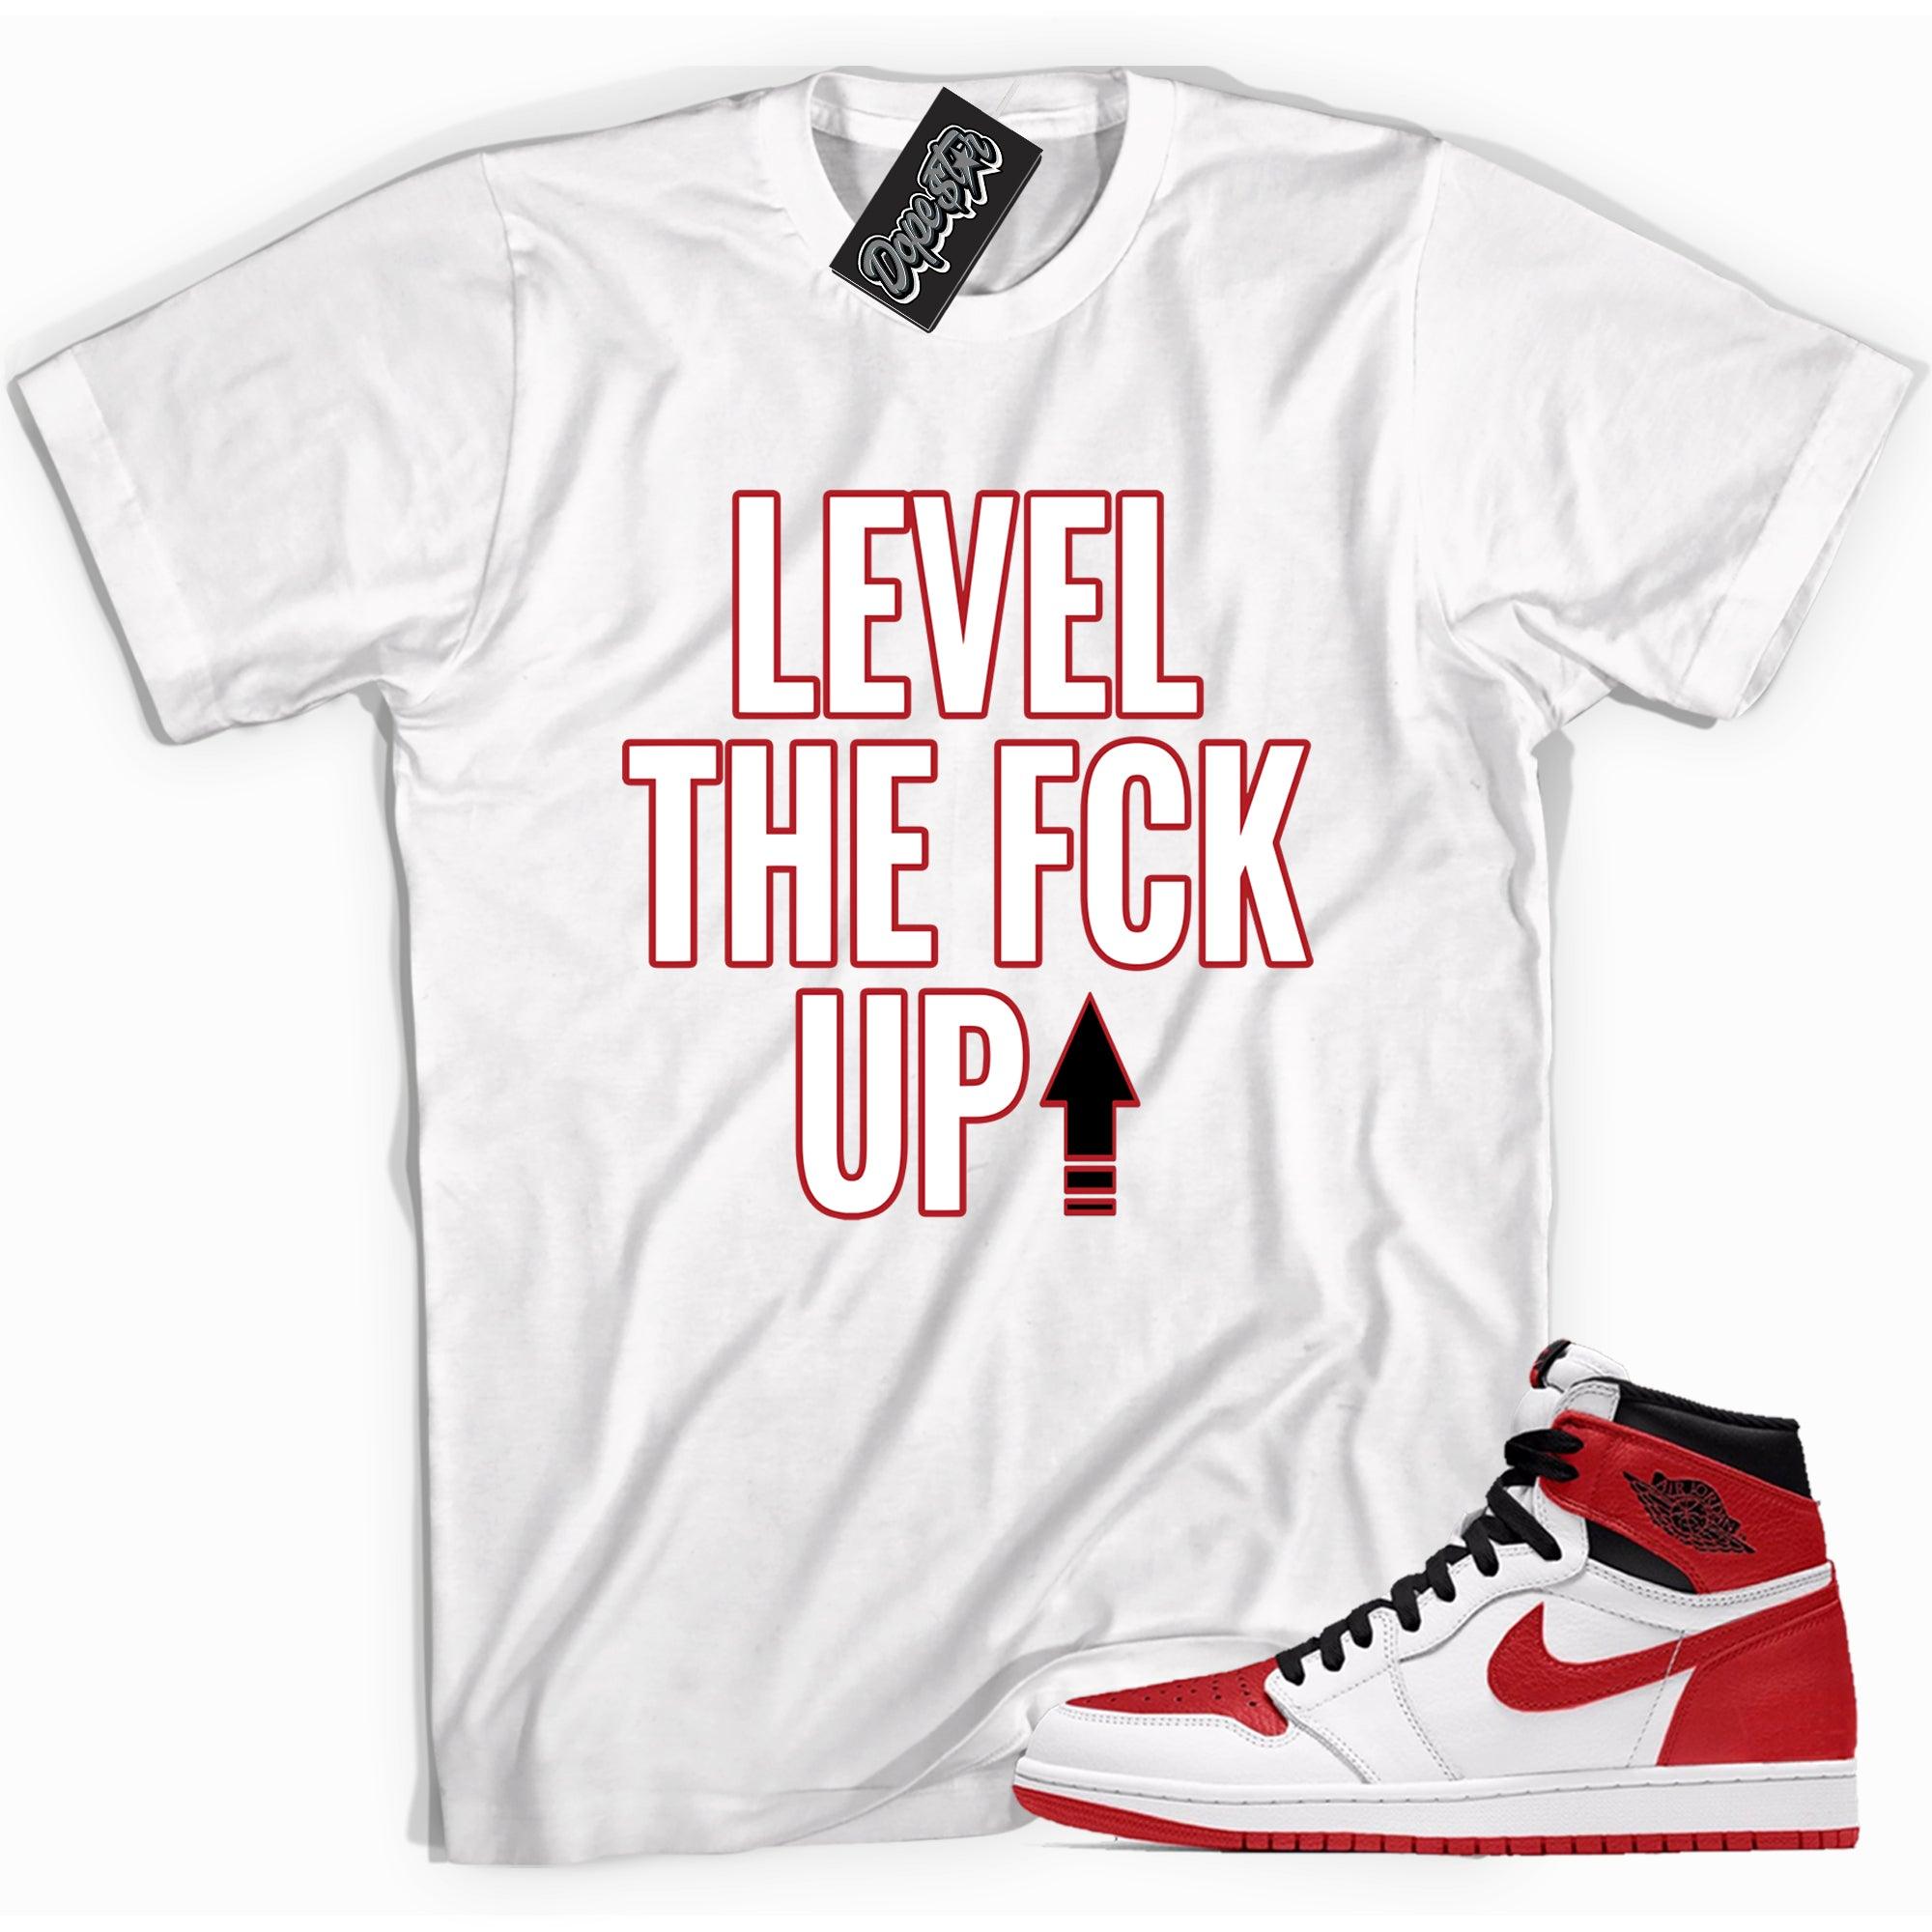 Cool white graphic tee with 'Level Up' print, that perfectly matches Air Jordan 1 Retro High OG Heritage Toe sneakers.